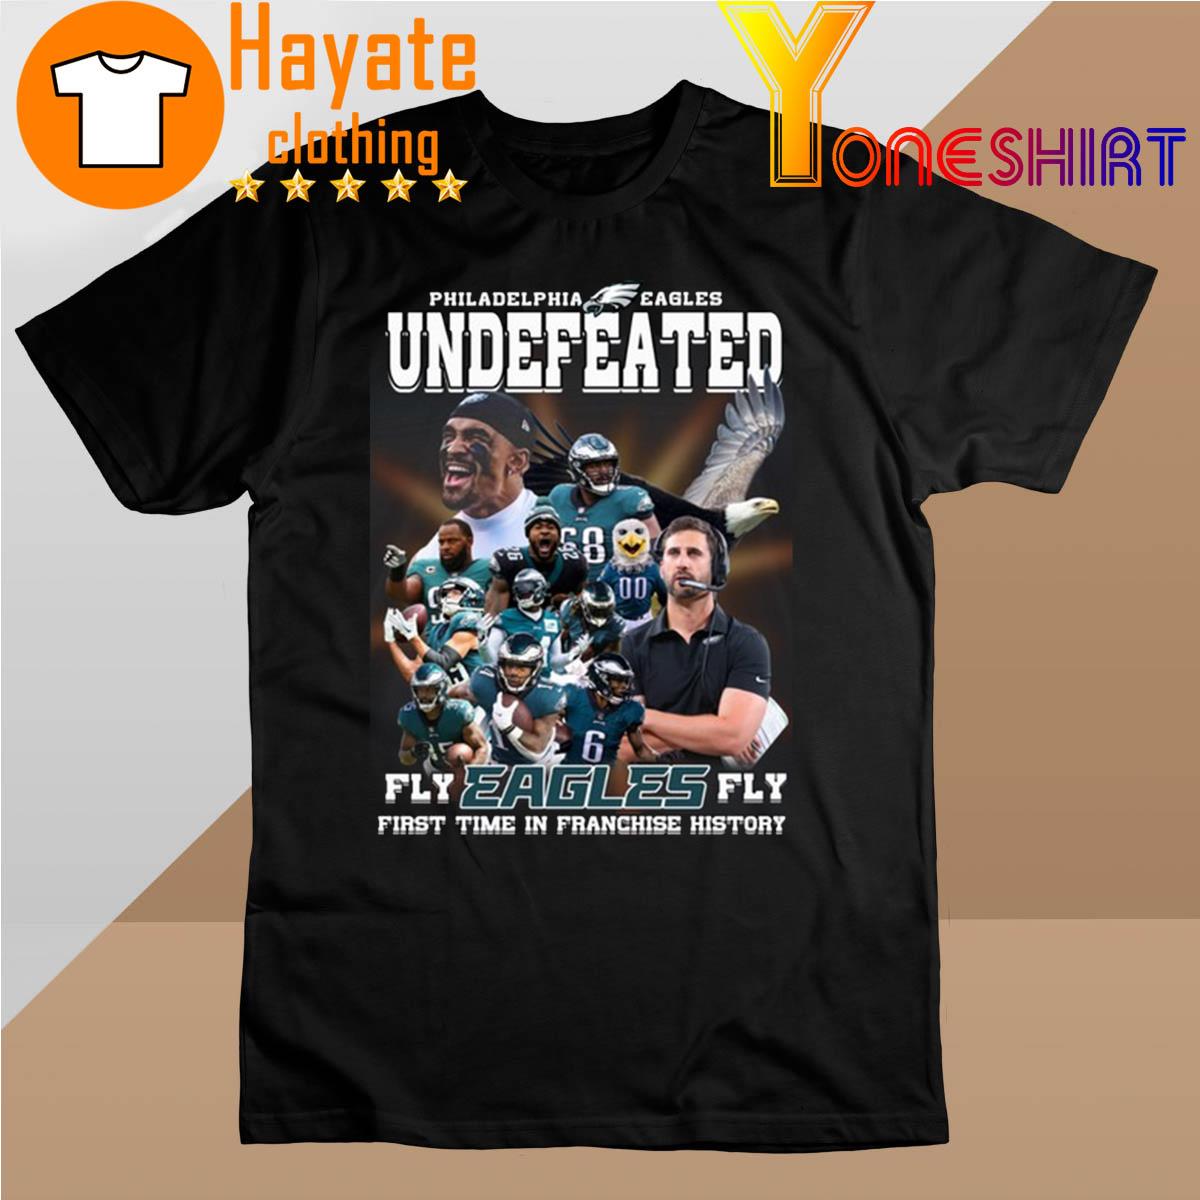 Philadelphia Eagles Undefeated Fly Eagles Fly First time in Franchise History shirt